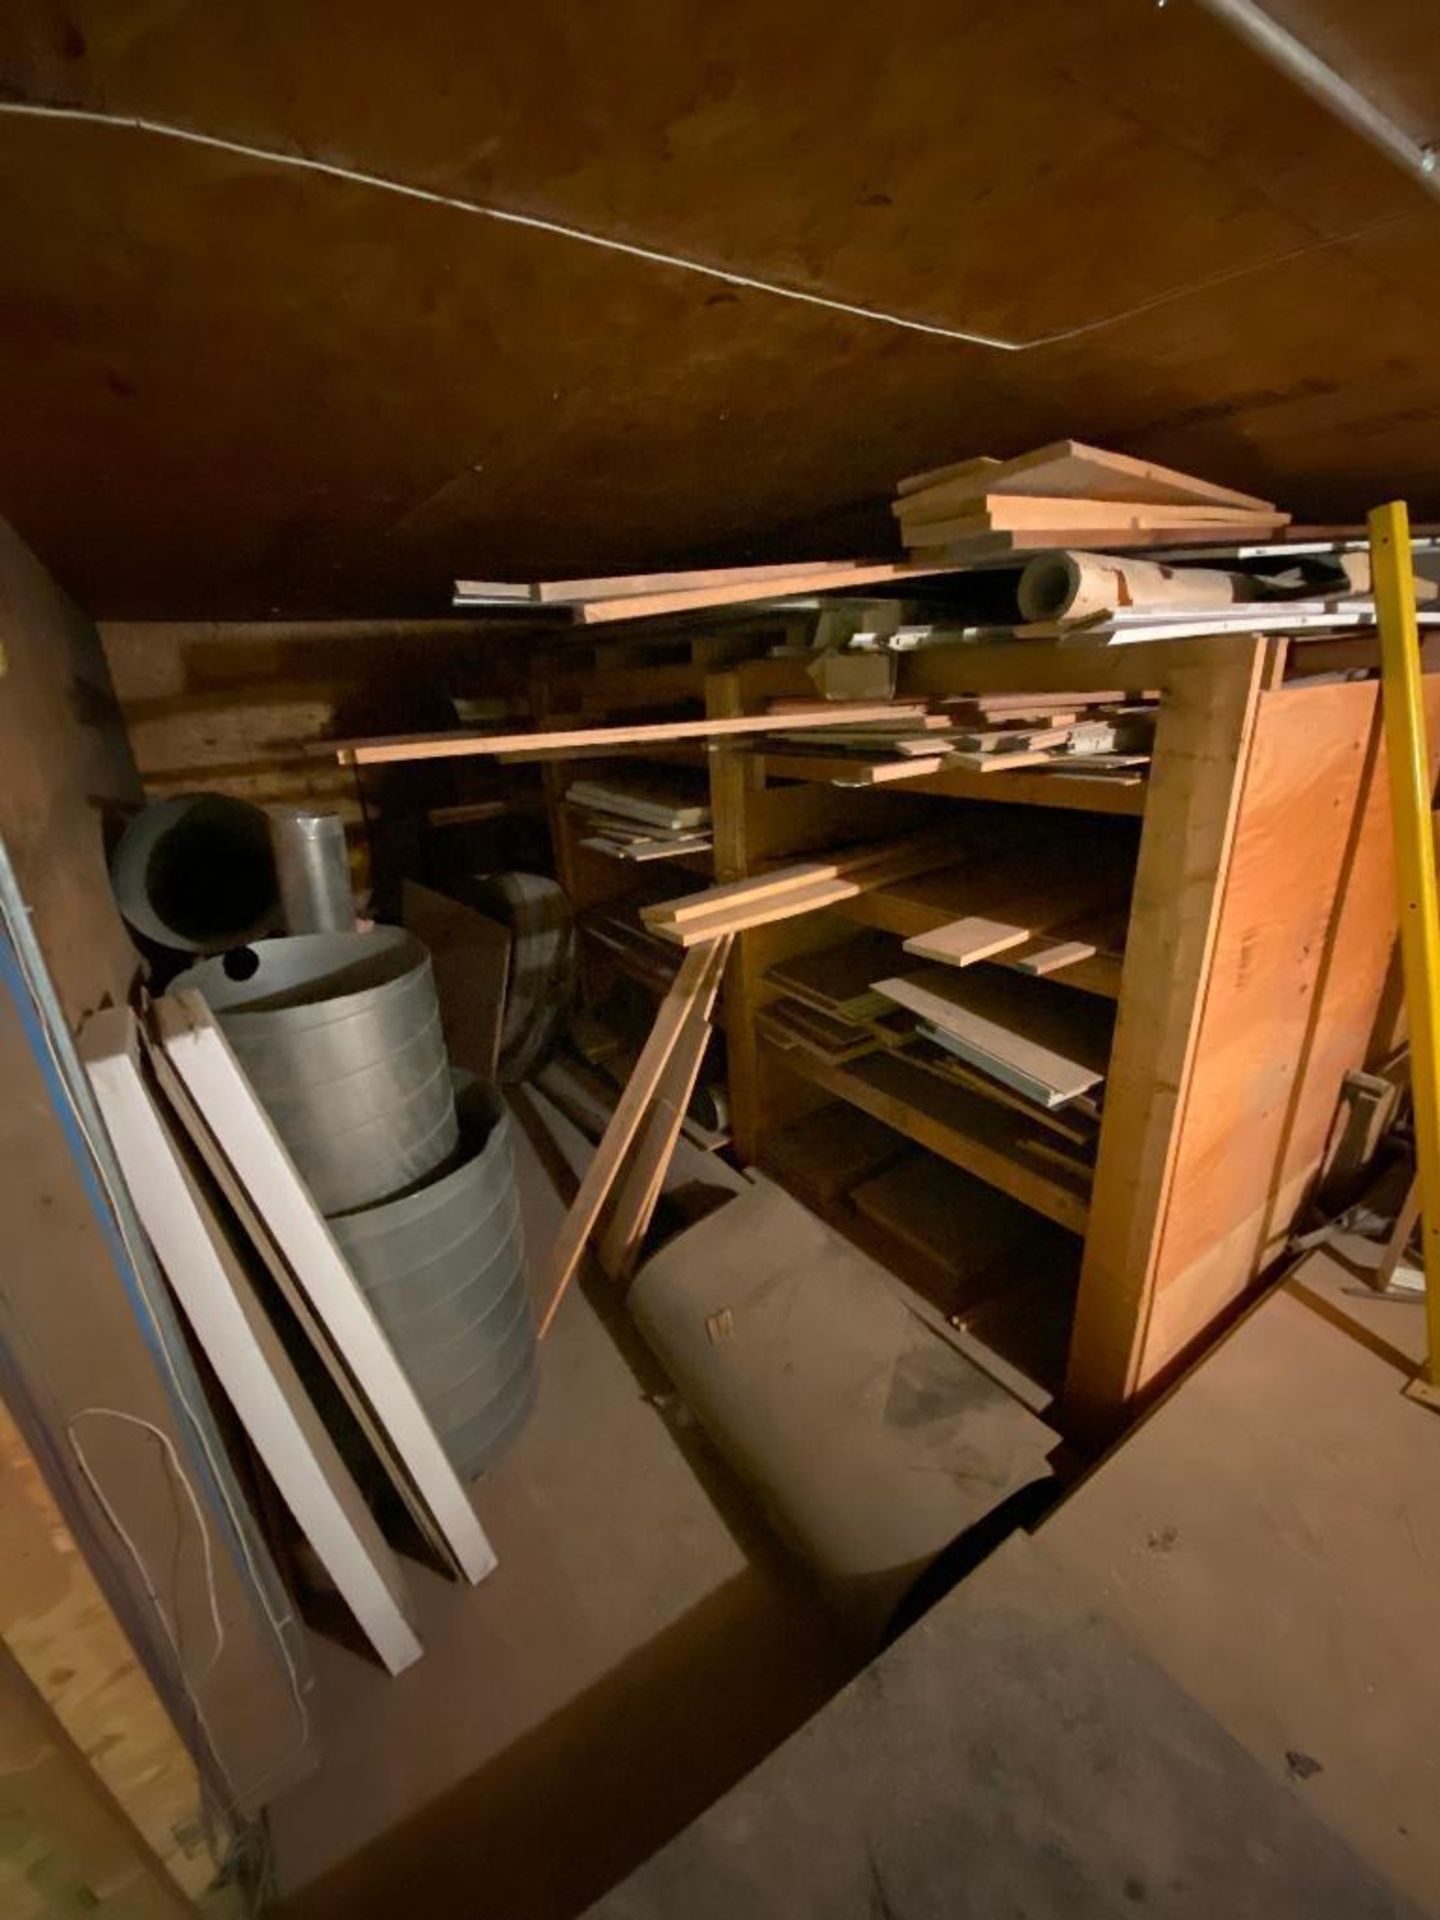 Lot of Asst. Lumber, Ductwork, etc. - Image 6 of 8